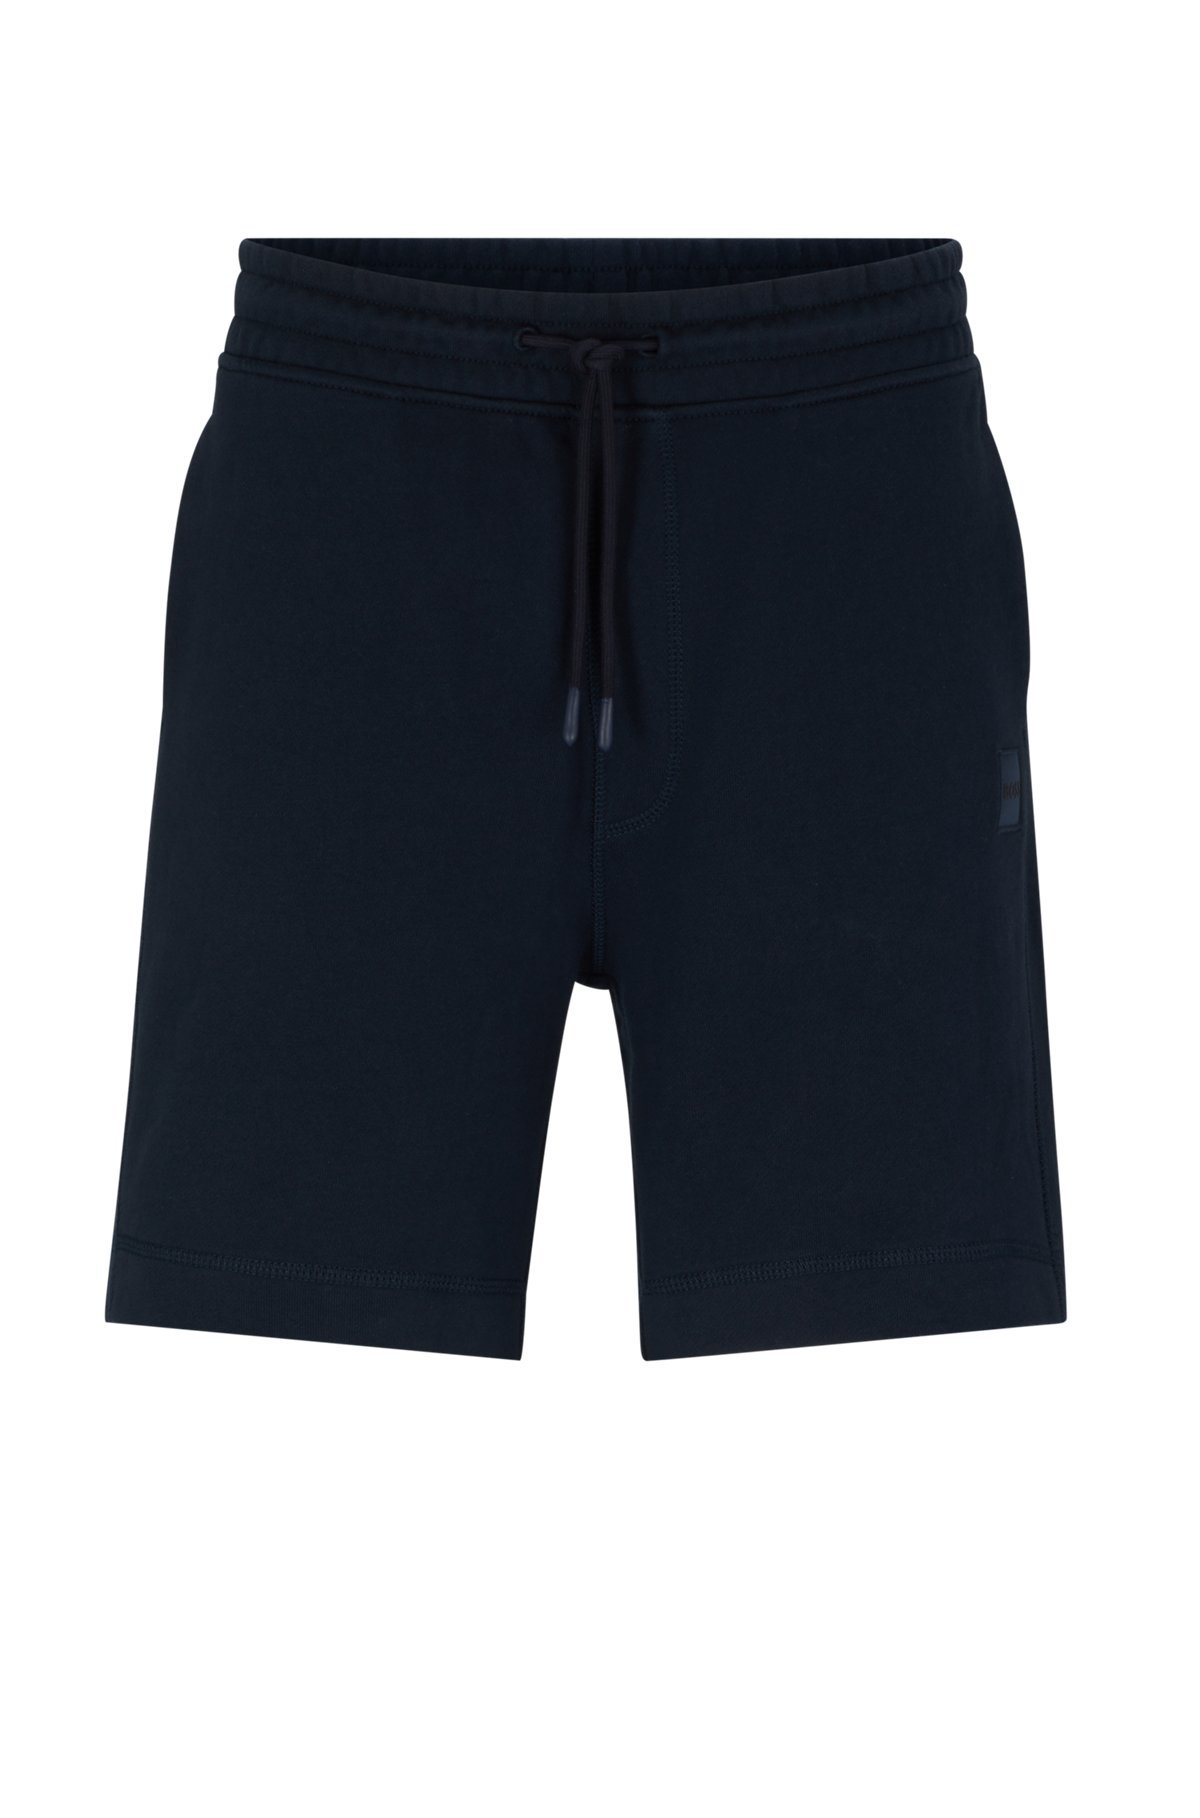 Drawstring shorts in French terry cotton with logo patch, Dark Blue